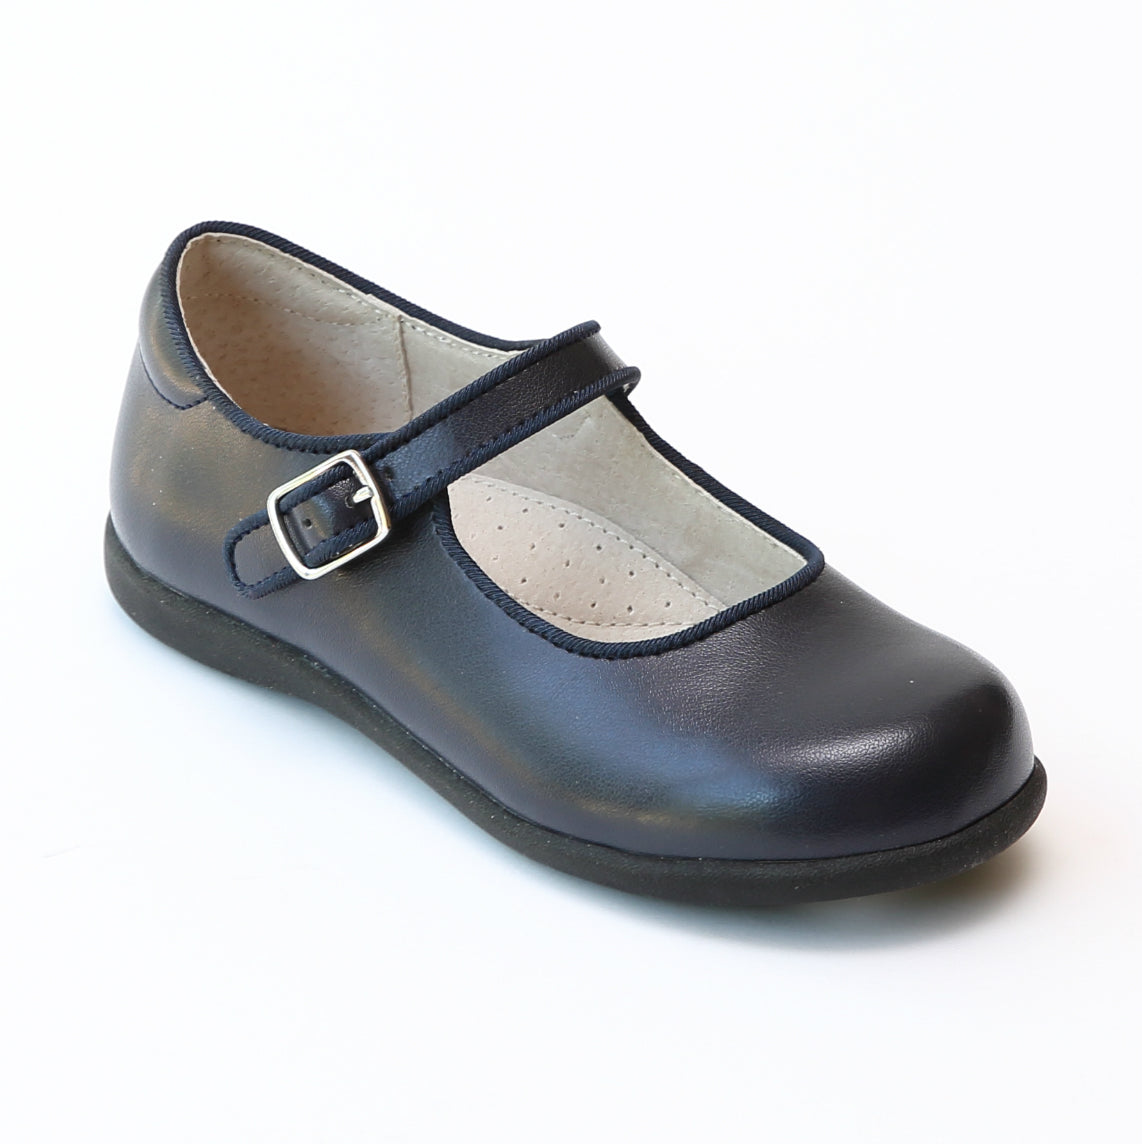 navy leather mary jane shoes